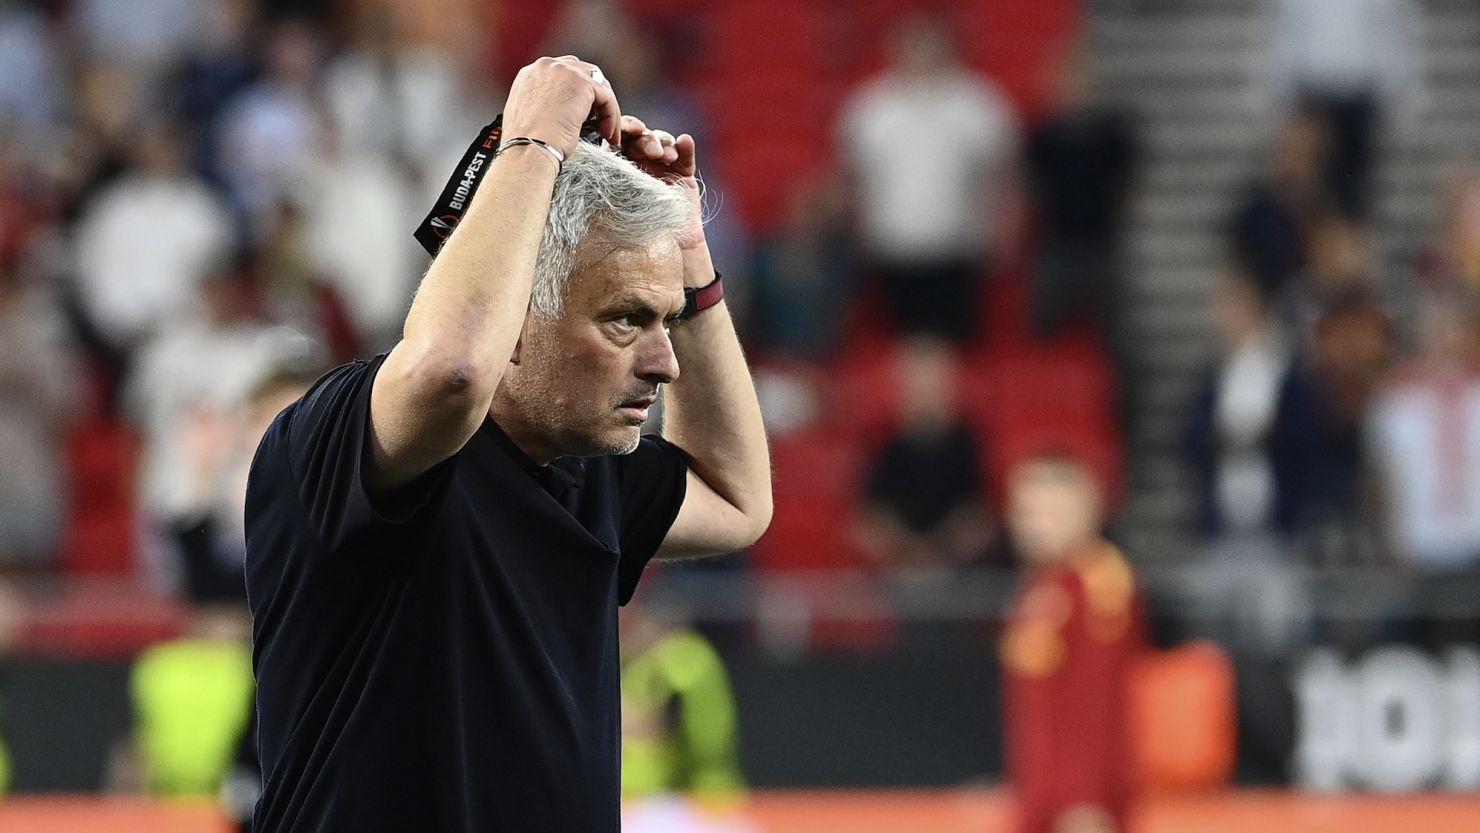 José Mourinho takes off his runners up medal after Roma lost in the Europa League final against Sevilla.